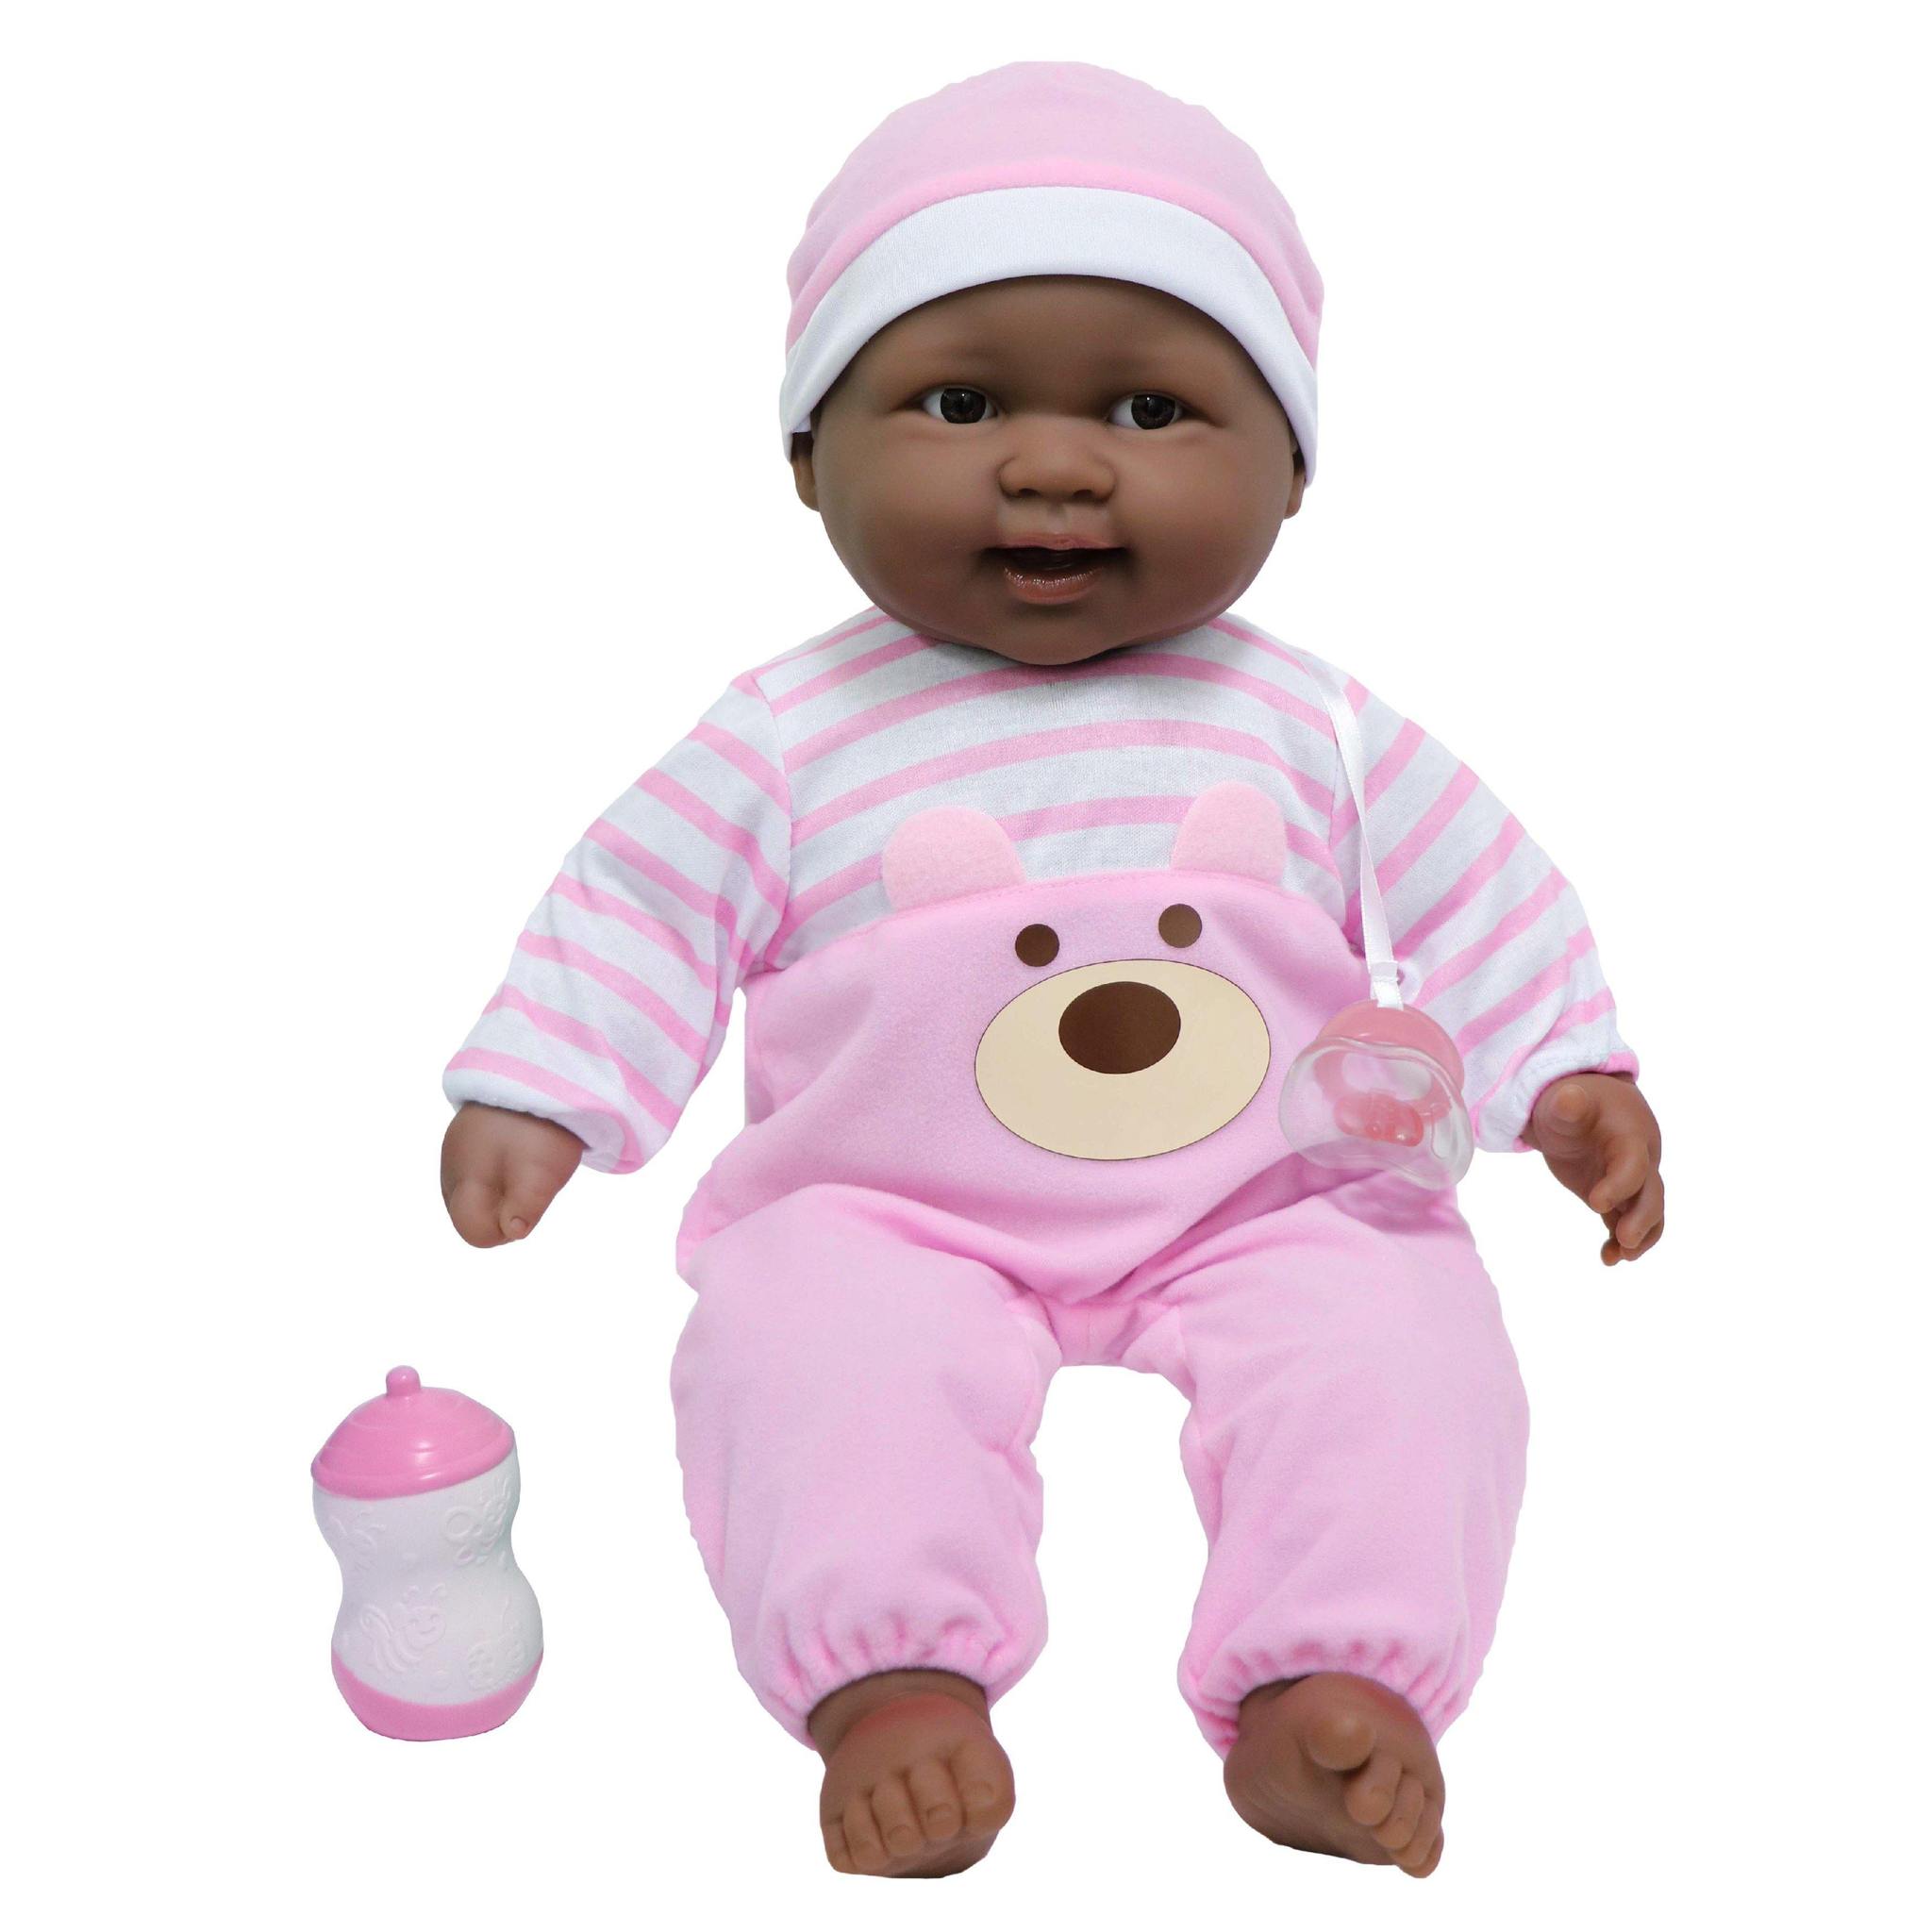 Dolls by Berenguer 35017 Lots to Cuddle Baby Doll African American 20